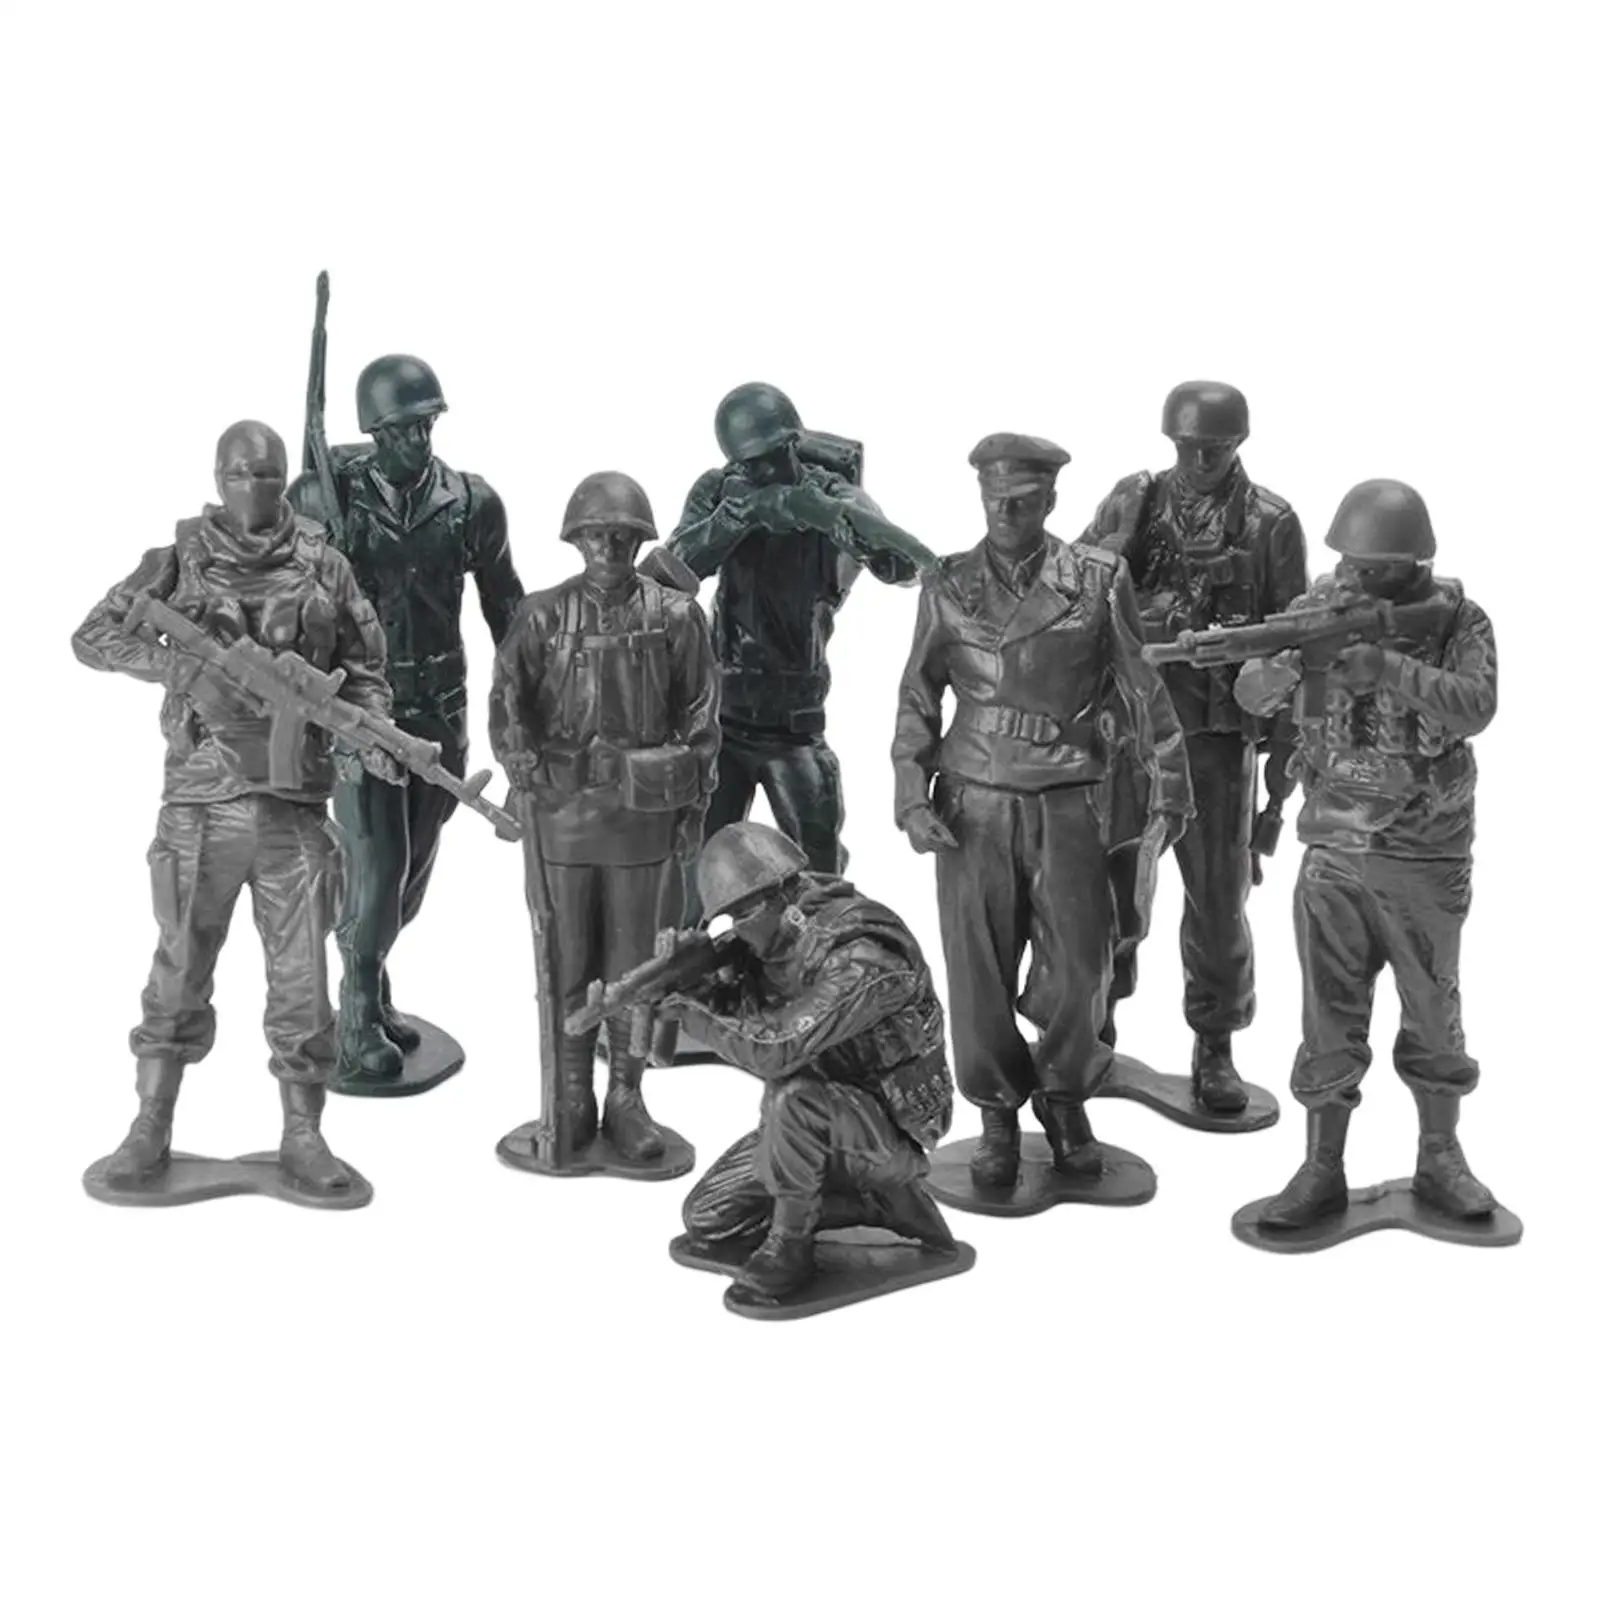 8 Pieces 1:18 Scale Action Figure Toy Soldiers Playset Diorama for Boys Kids